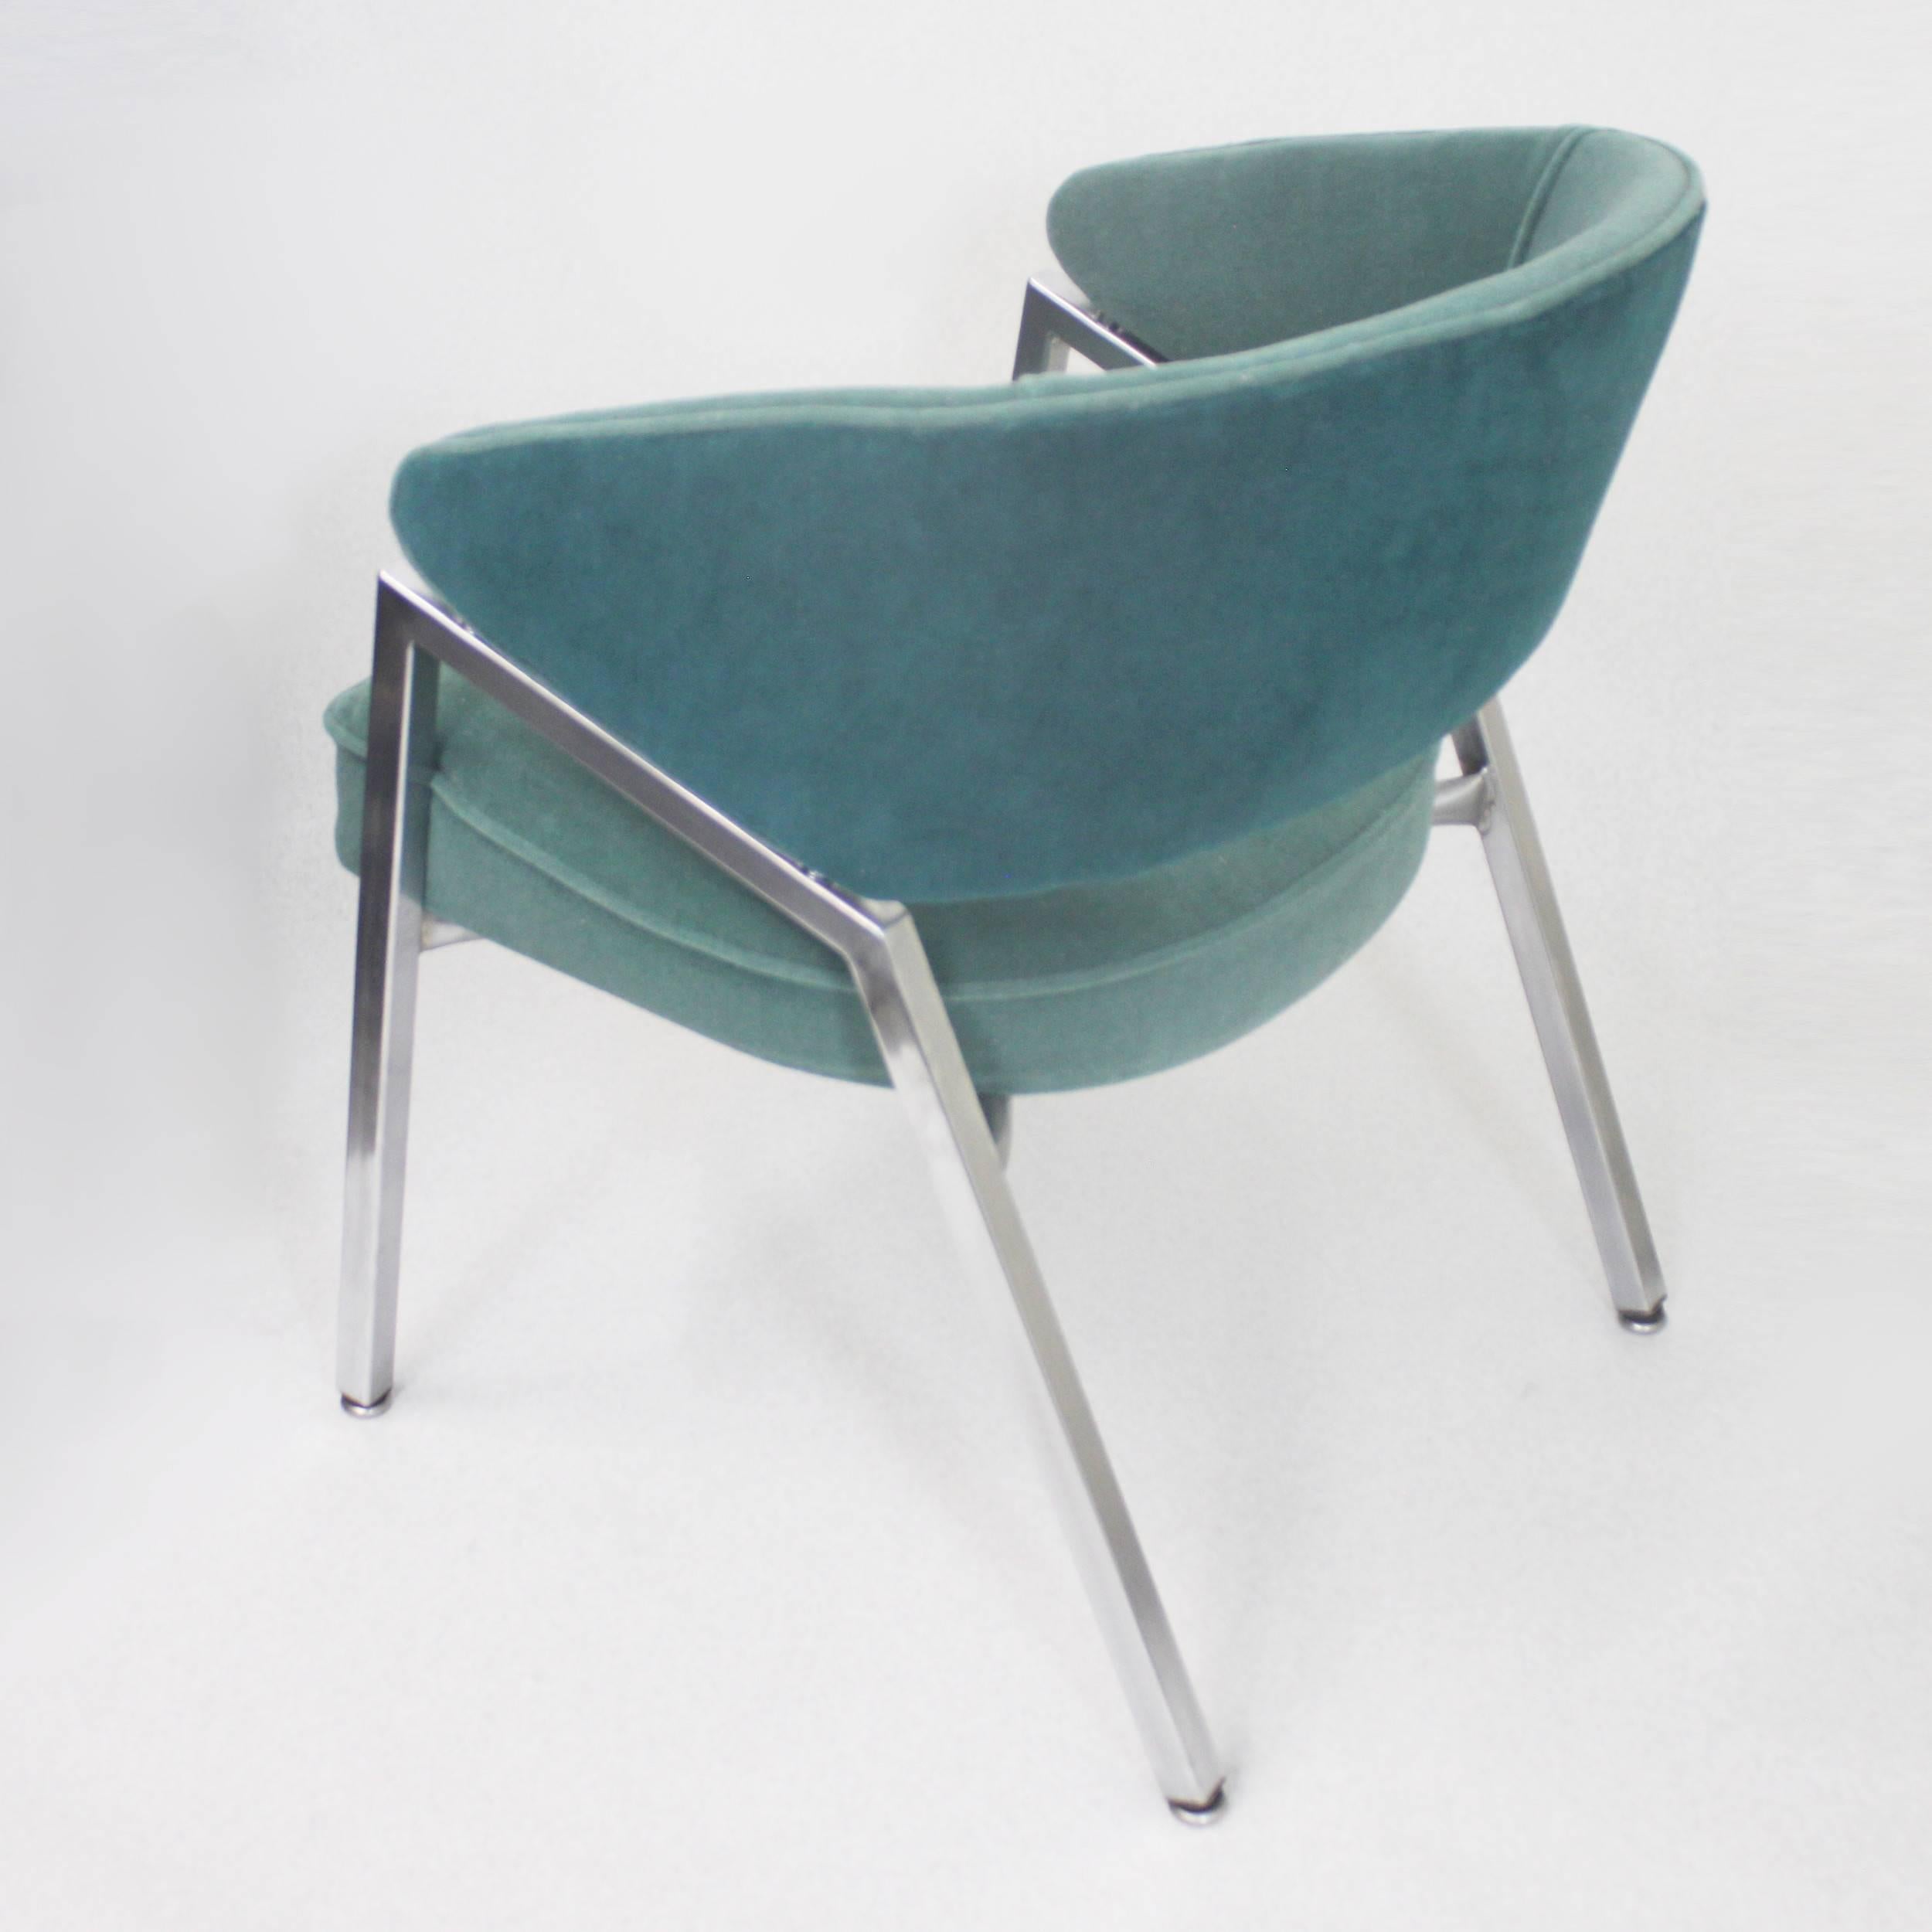 Upholstery Rare Pair of 1970s Mid-Century Modern Teal Green and Chrome Side Armchairs